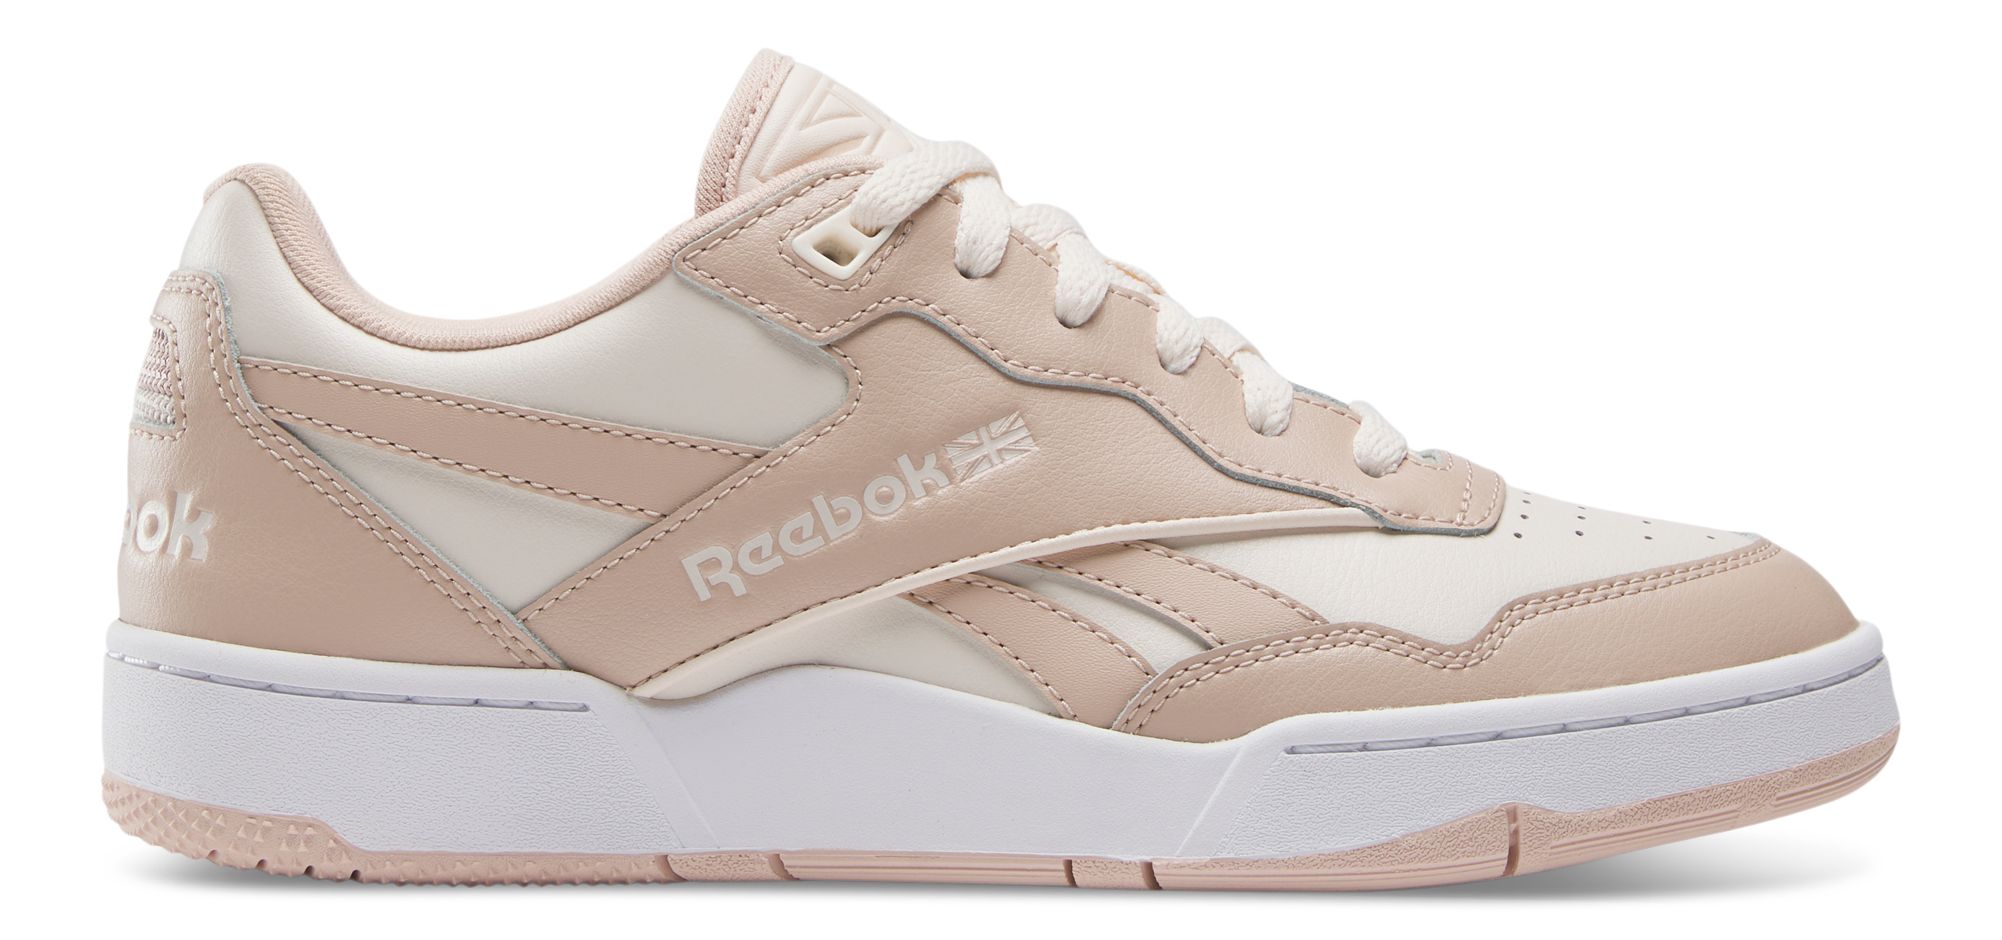 Image of Reebok Women's Bb4000 Casual Shoes Sneakers